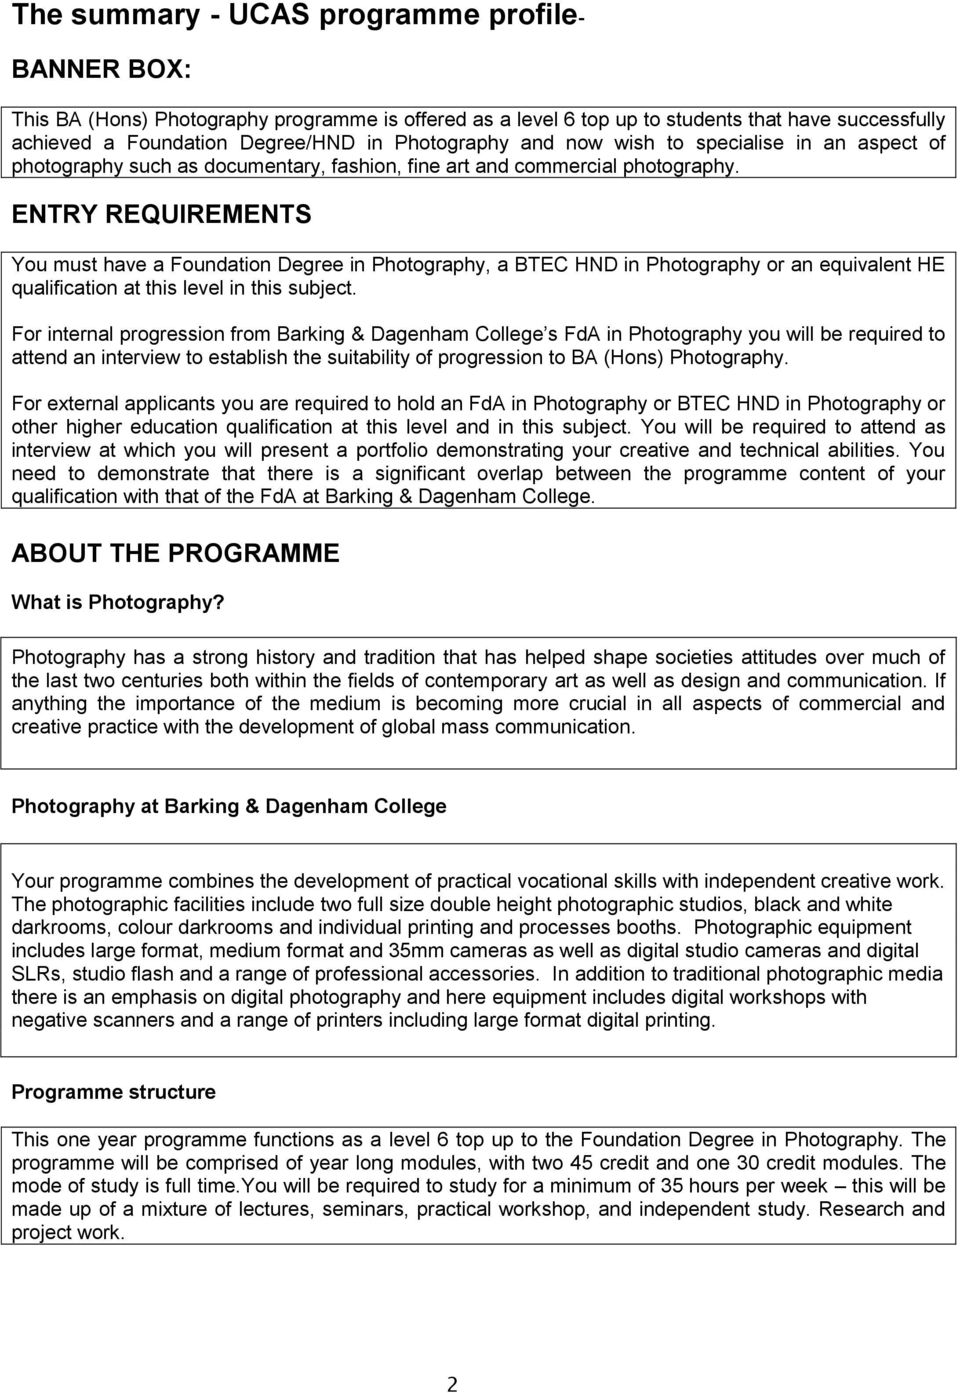 ENTRY REQUIREMENTS You must have a Foundation Degree in Photography, a BTEC HND in Photography or an equivalent HE qualification at this level in this subject.